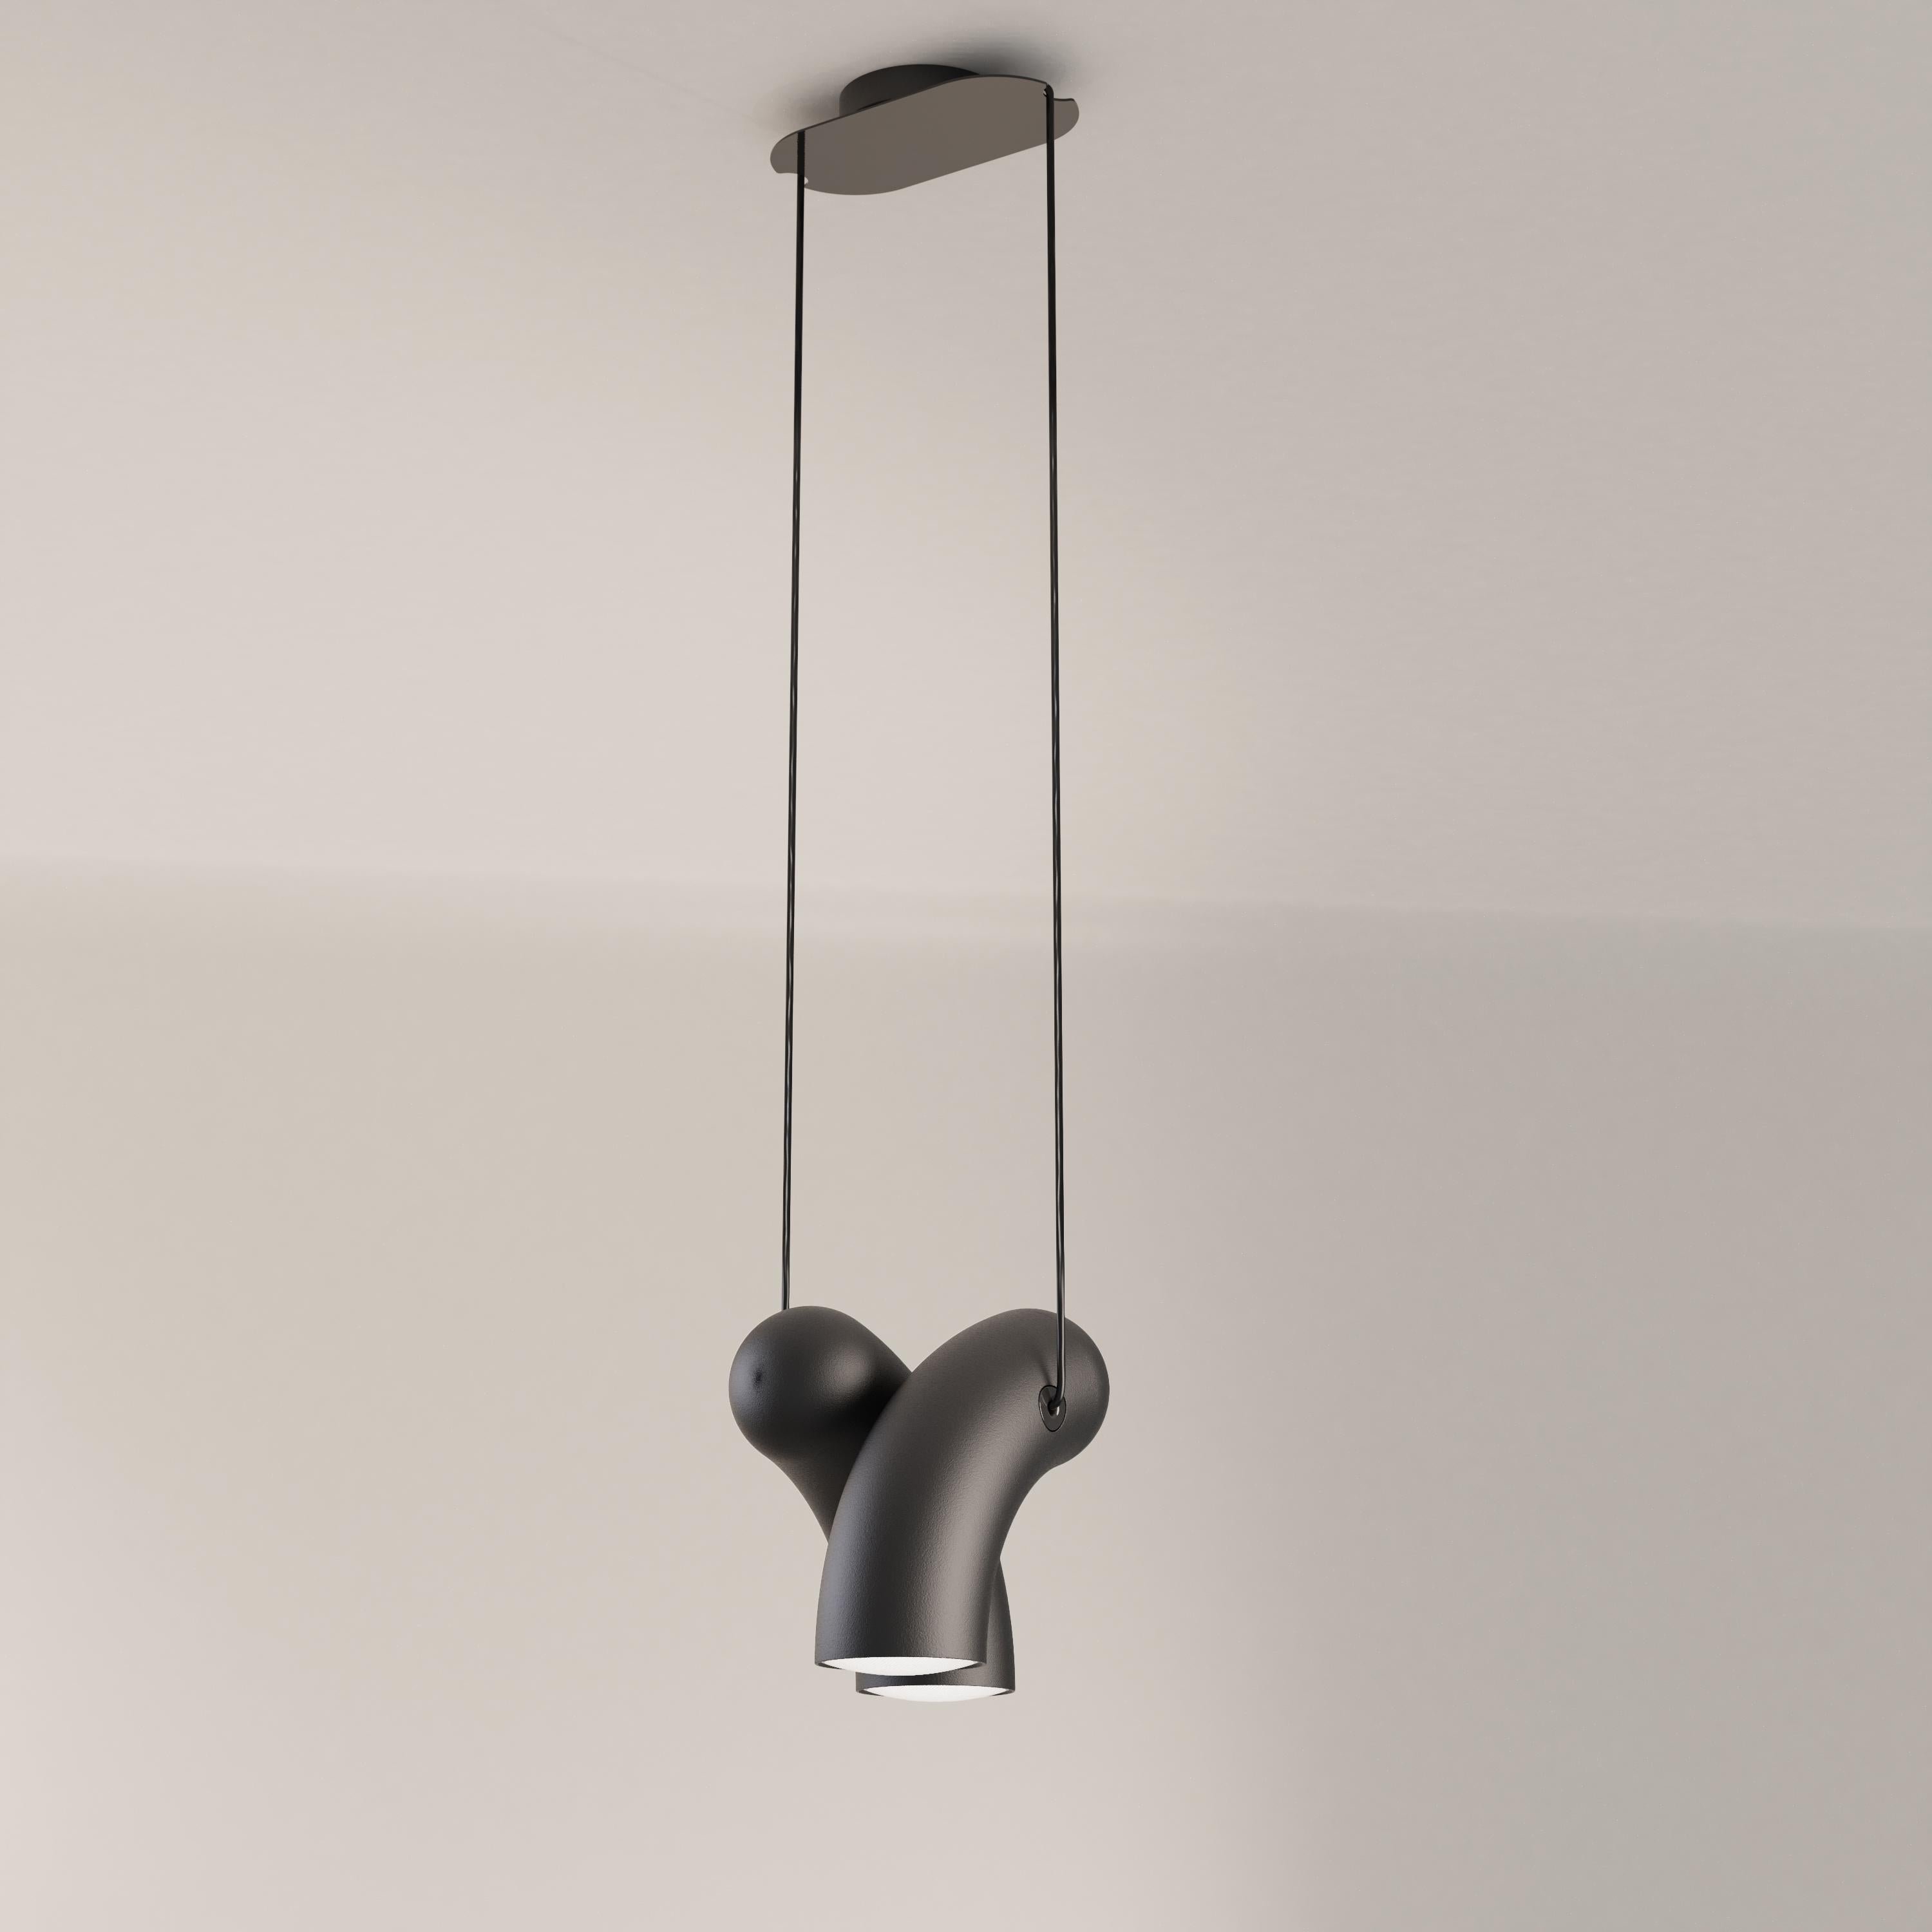 Sandy Black Hyphen pendant lamp by Studio d'Armes
Dimensions: D 29 x W 22 x H 24 cm
Materials: Sanded black cast steel.
Available in steel sandy black, steel chromatic black, natural porcelain and steel custom.

Derived from the ancient Greek